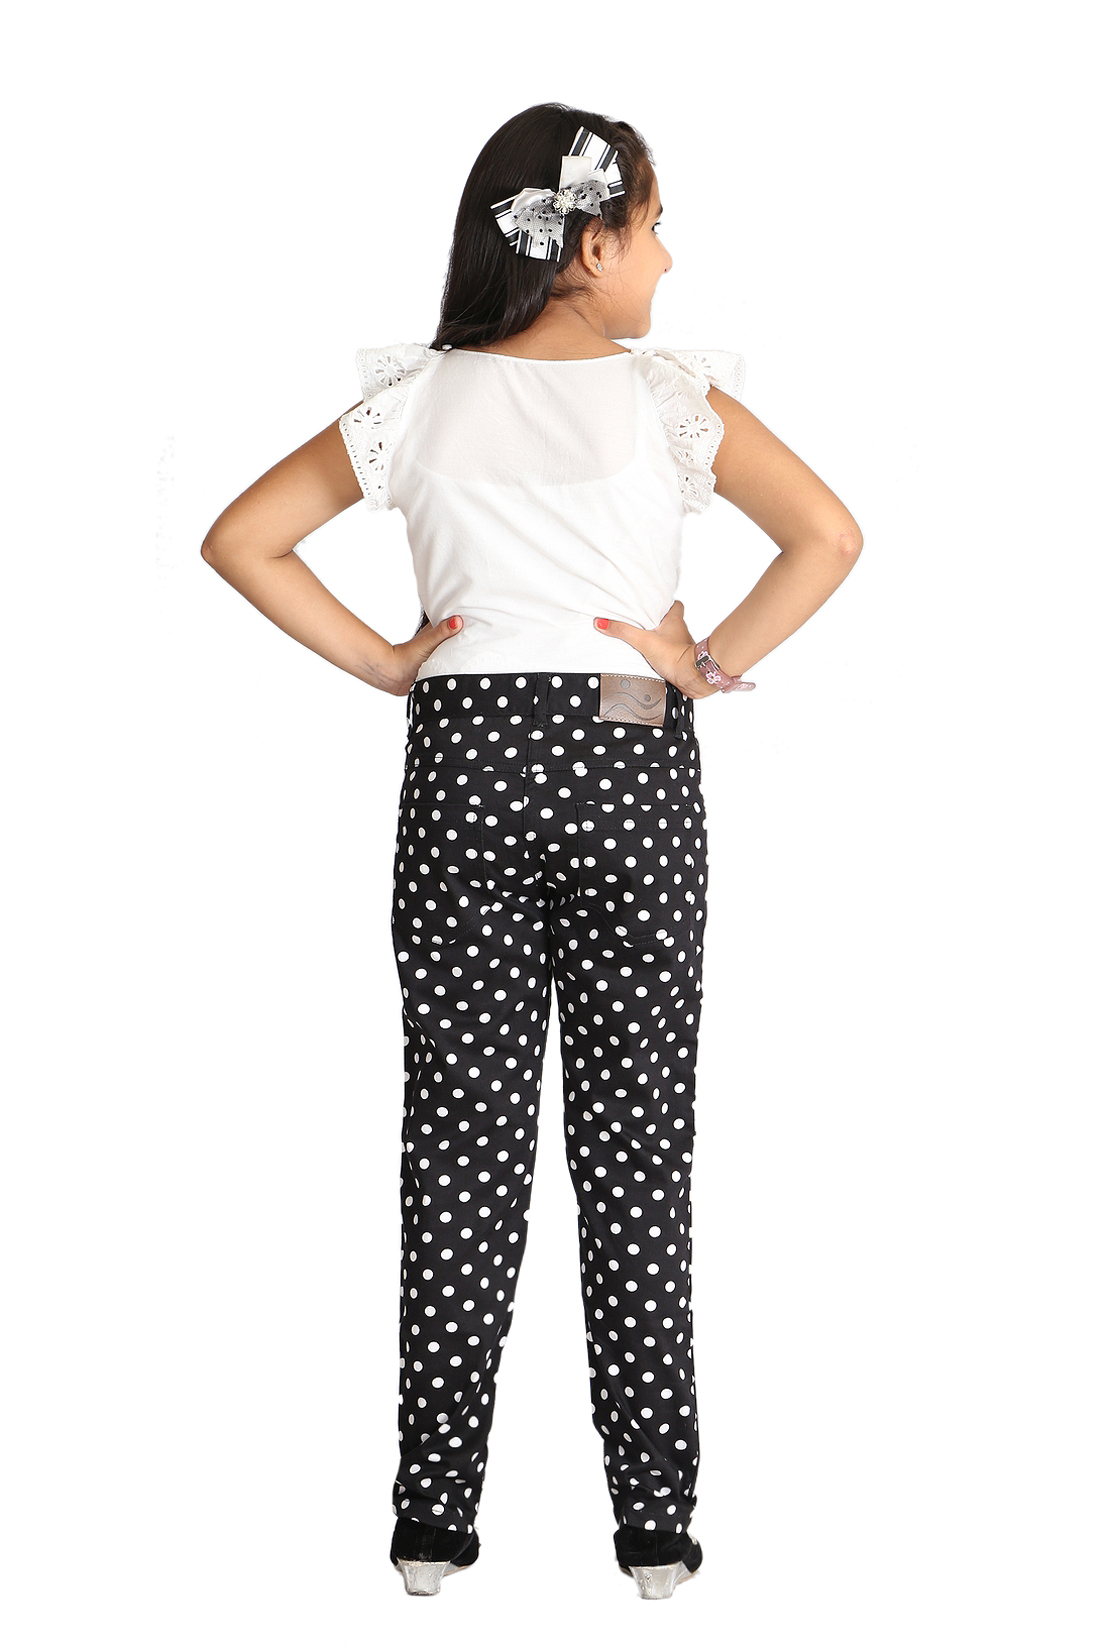 lace up white trousers formal ladies| Alibaba.com